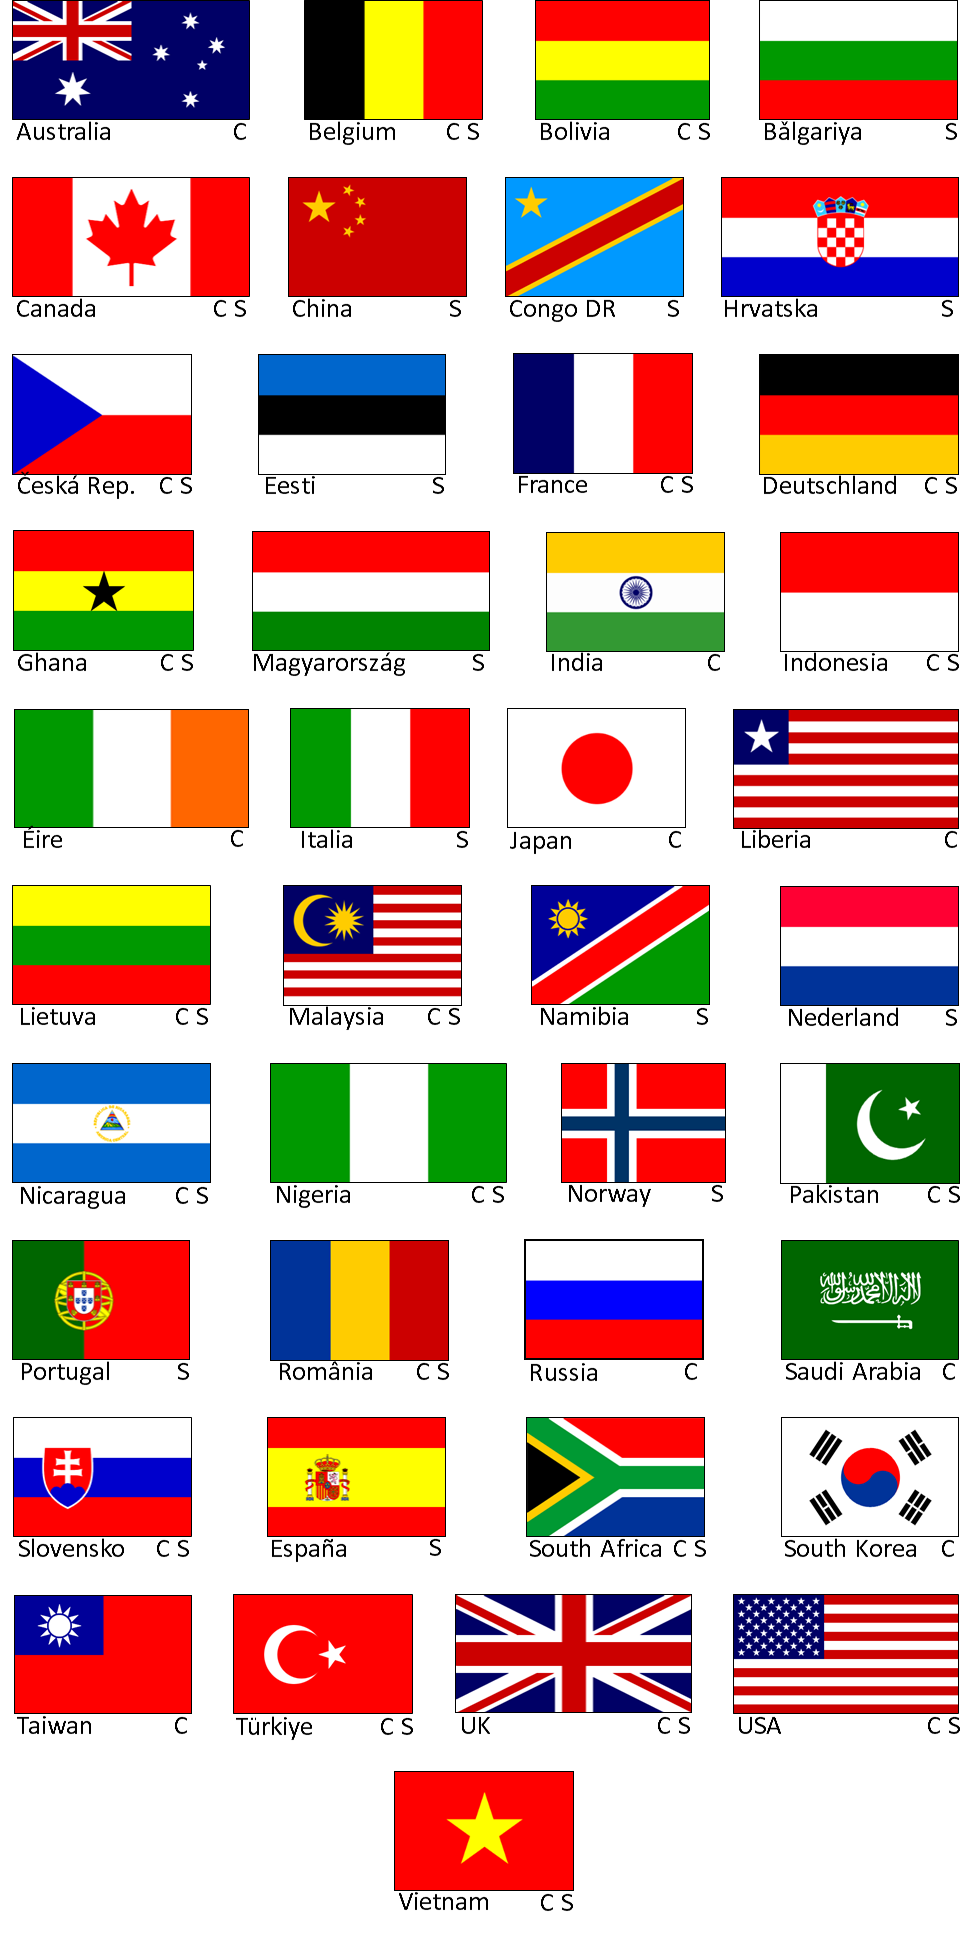 LM1 countries participating